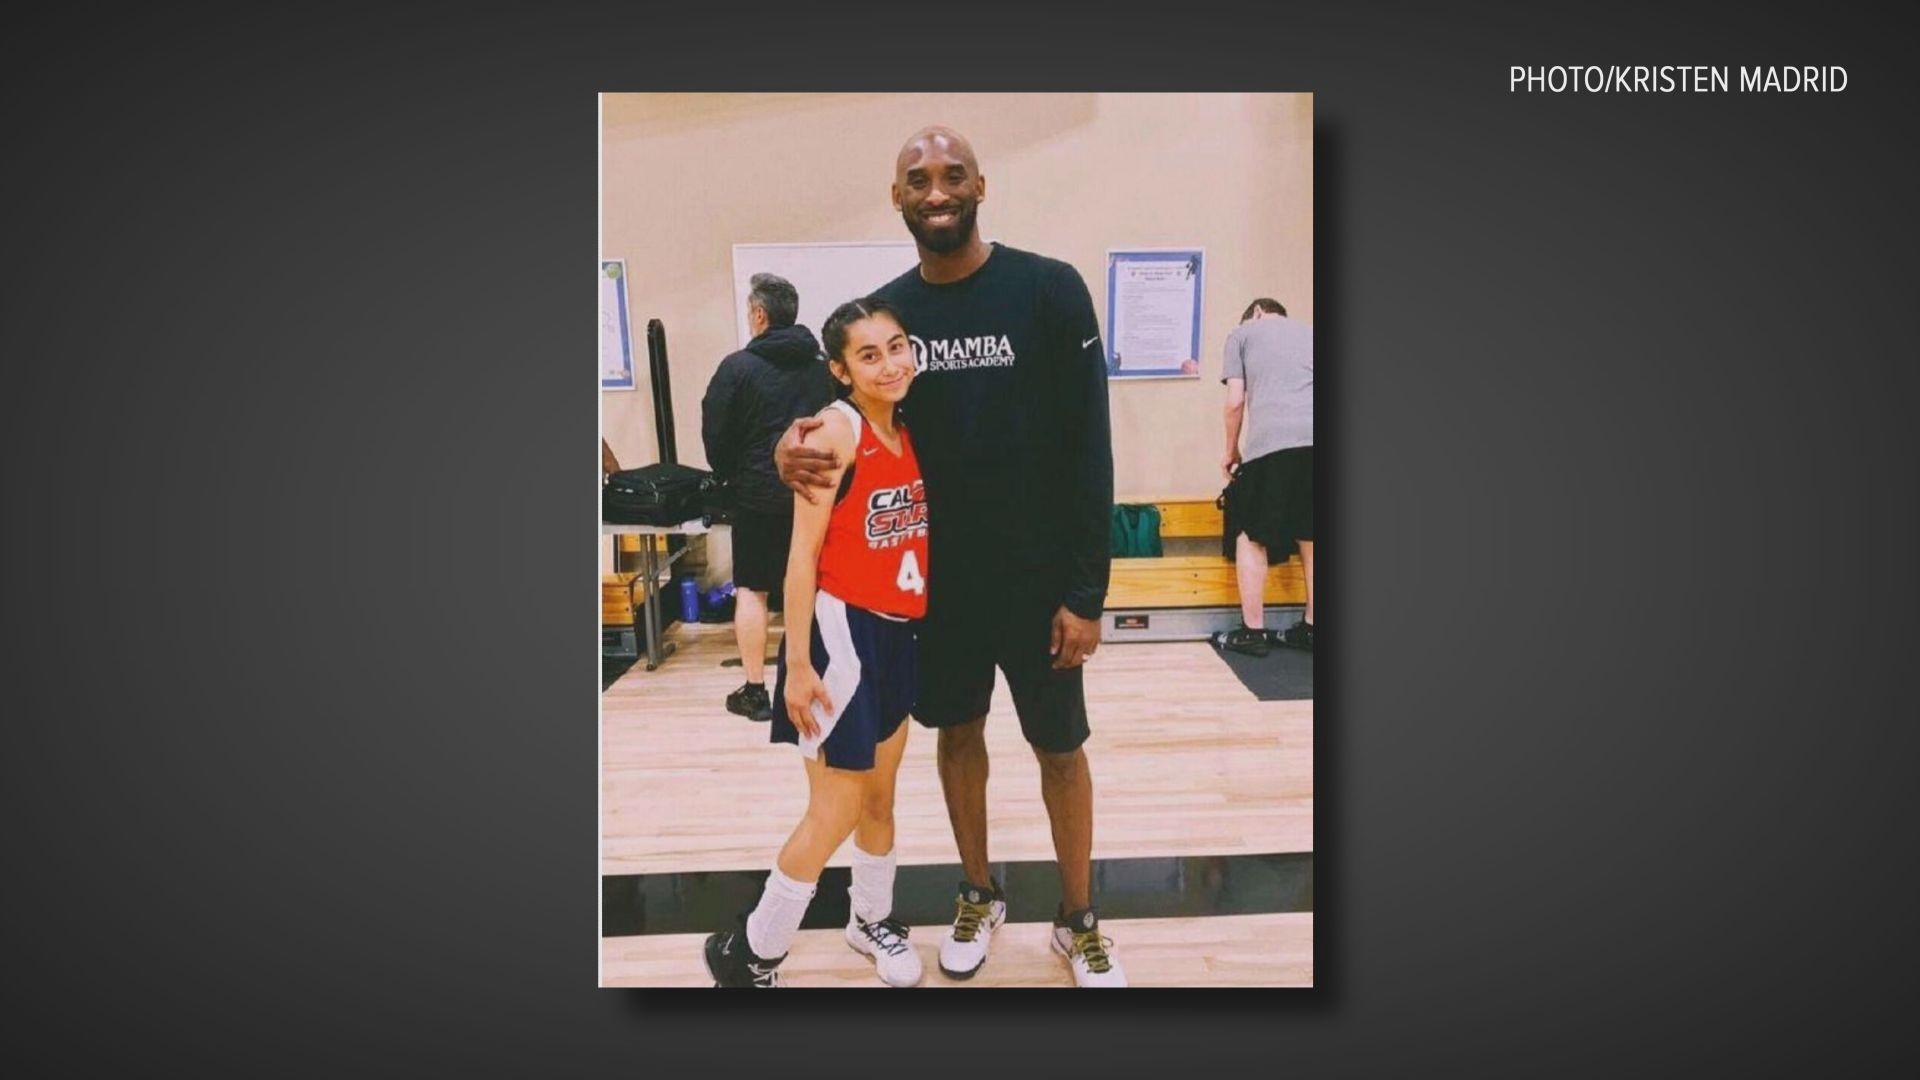 When the Roseville High School Basketball team was in need of funding, Kobe Bryant offered to help right away.